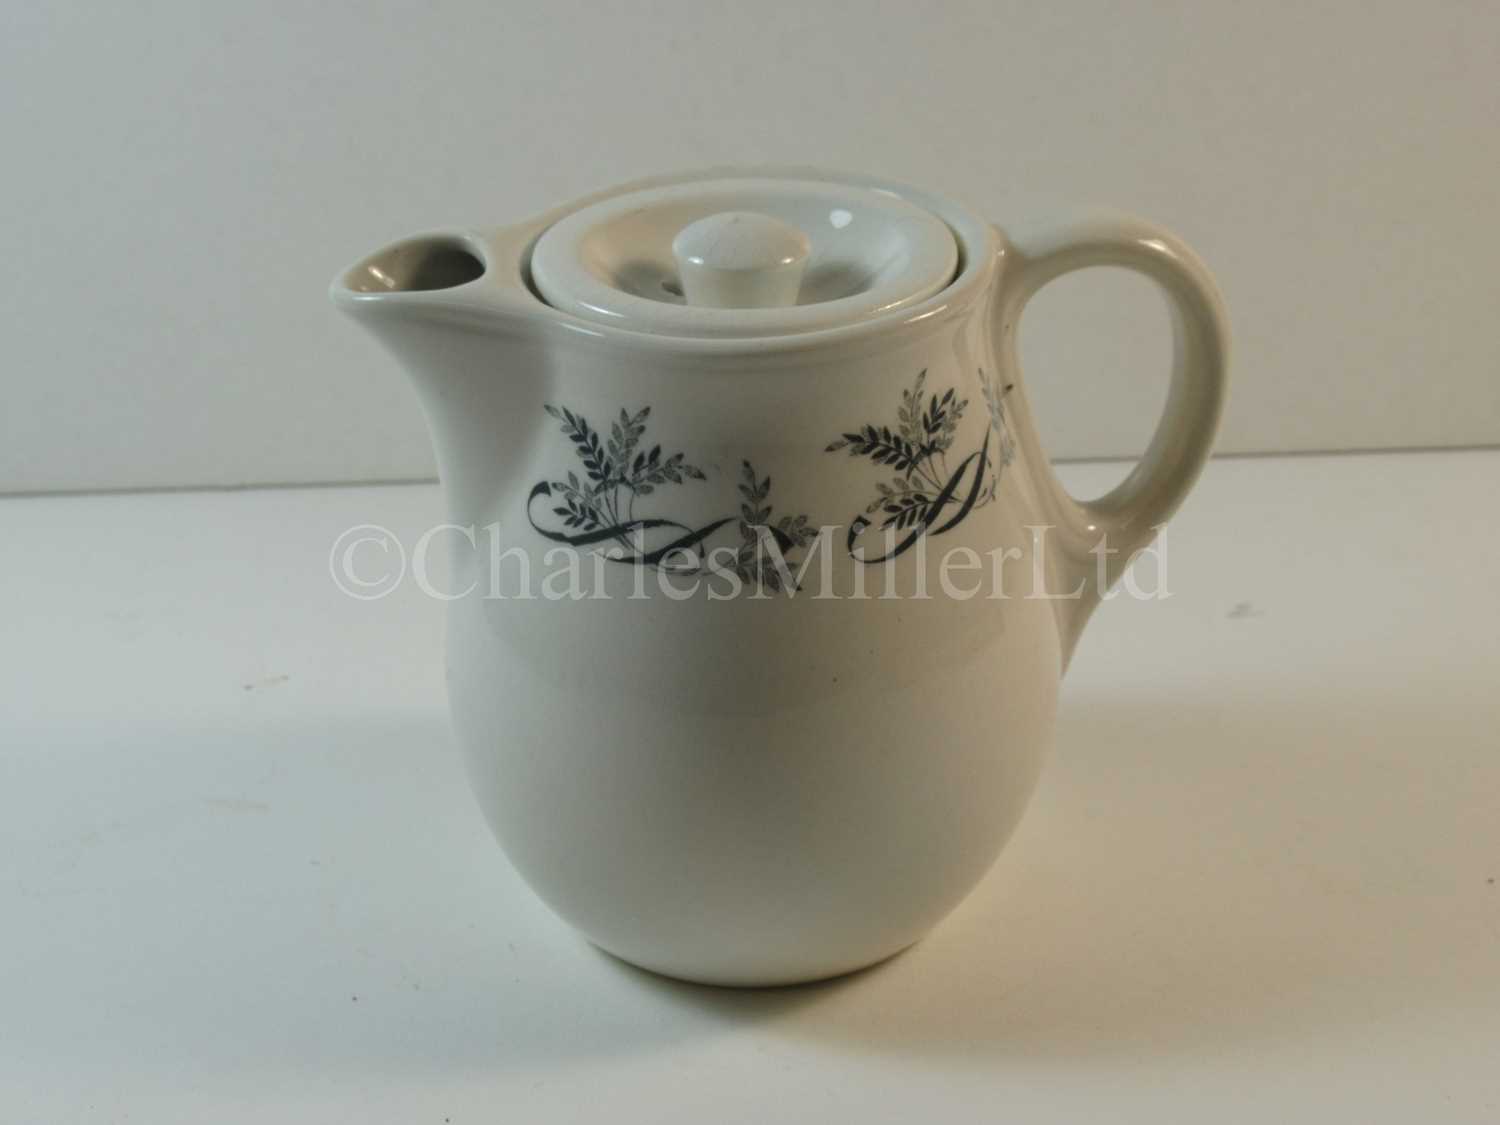 Lot 19 - A British & Commonwealth Line hot water small jug